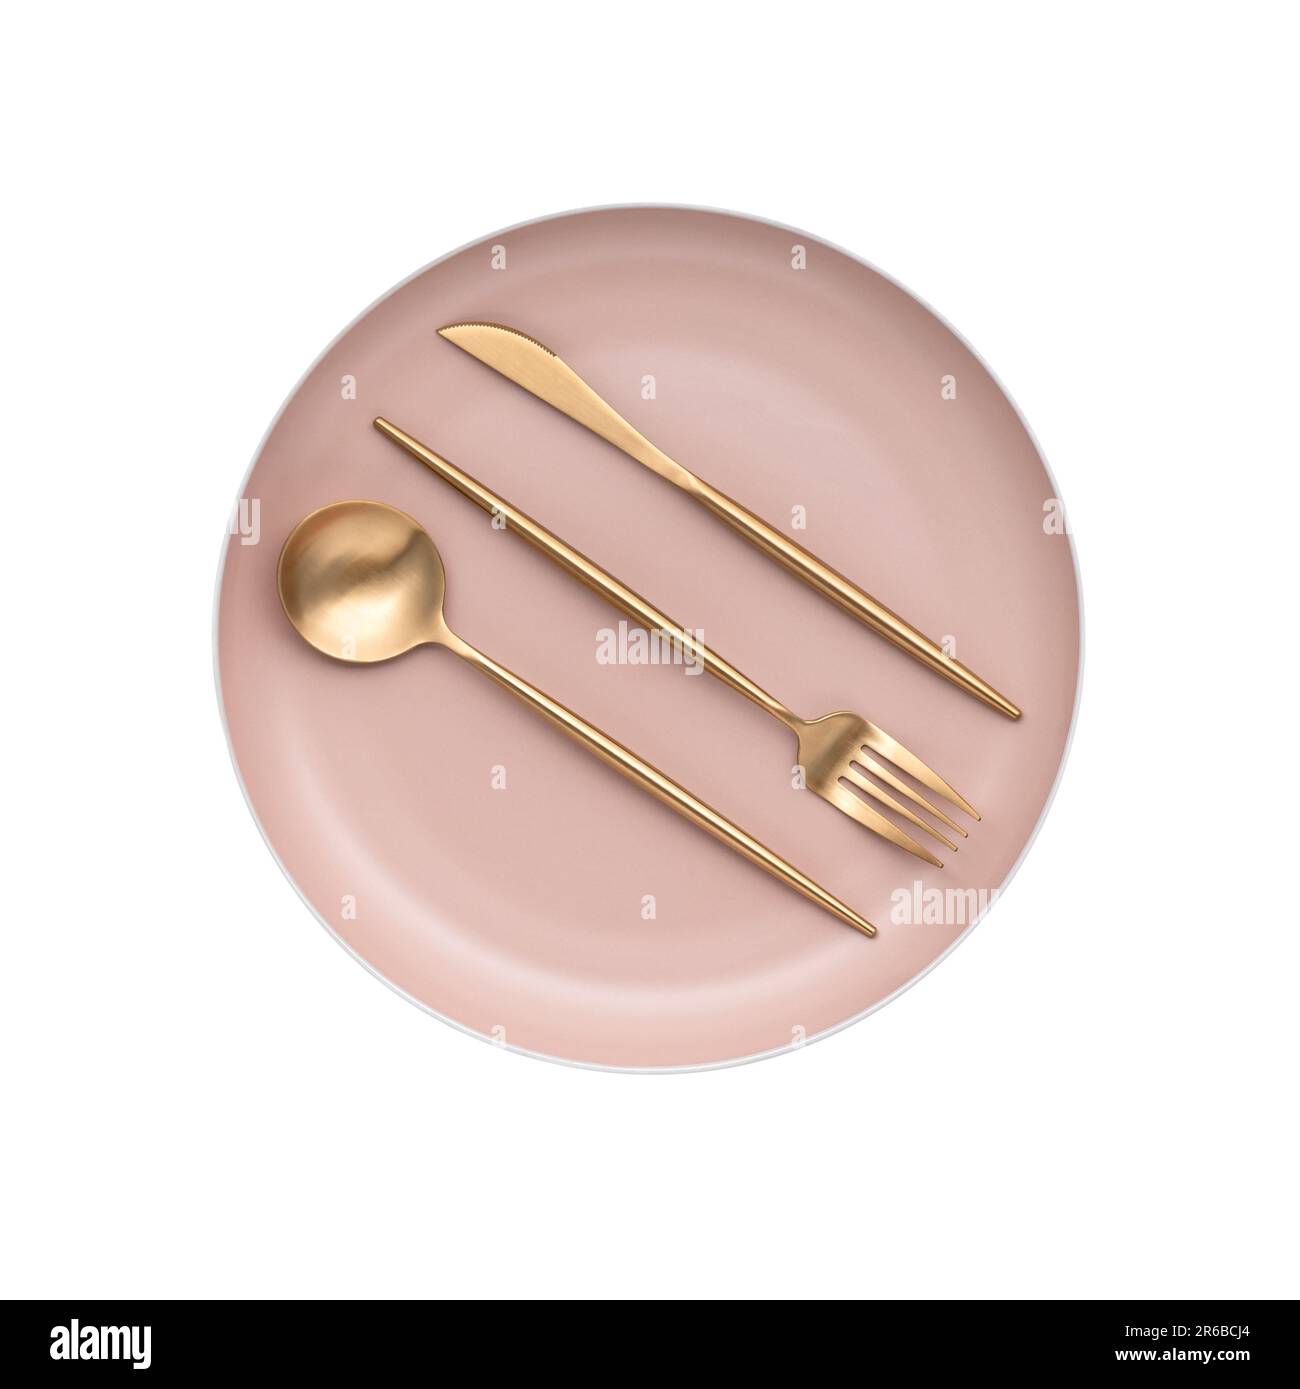 Gold Utensils, Gold and White Silverware Set, Food Flat Lay Props, Food  Photography Props 